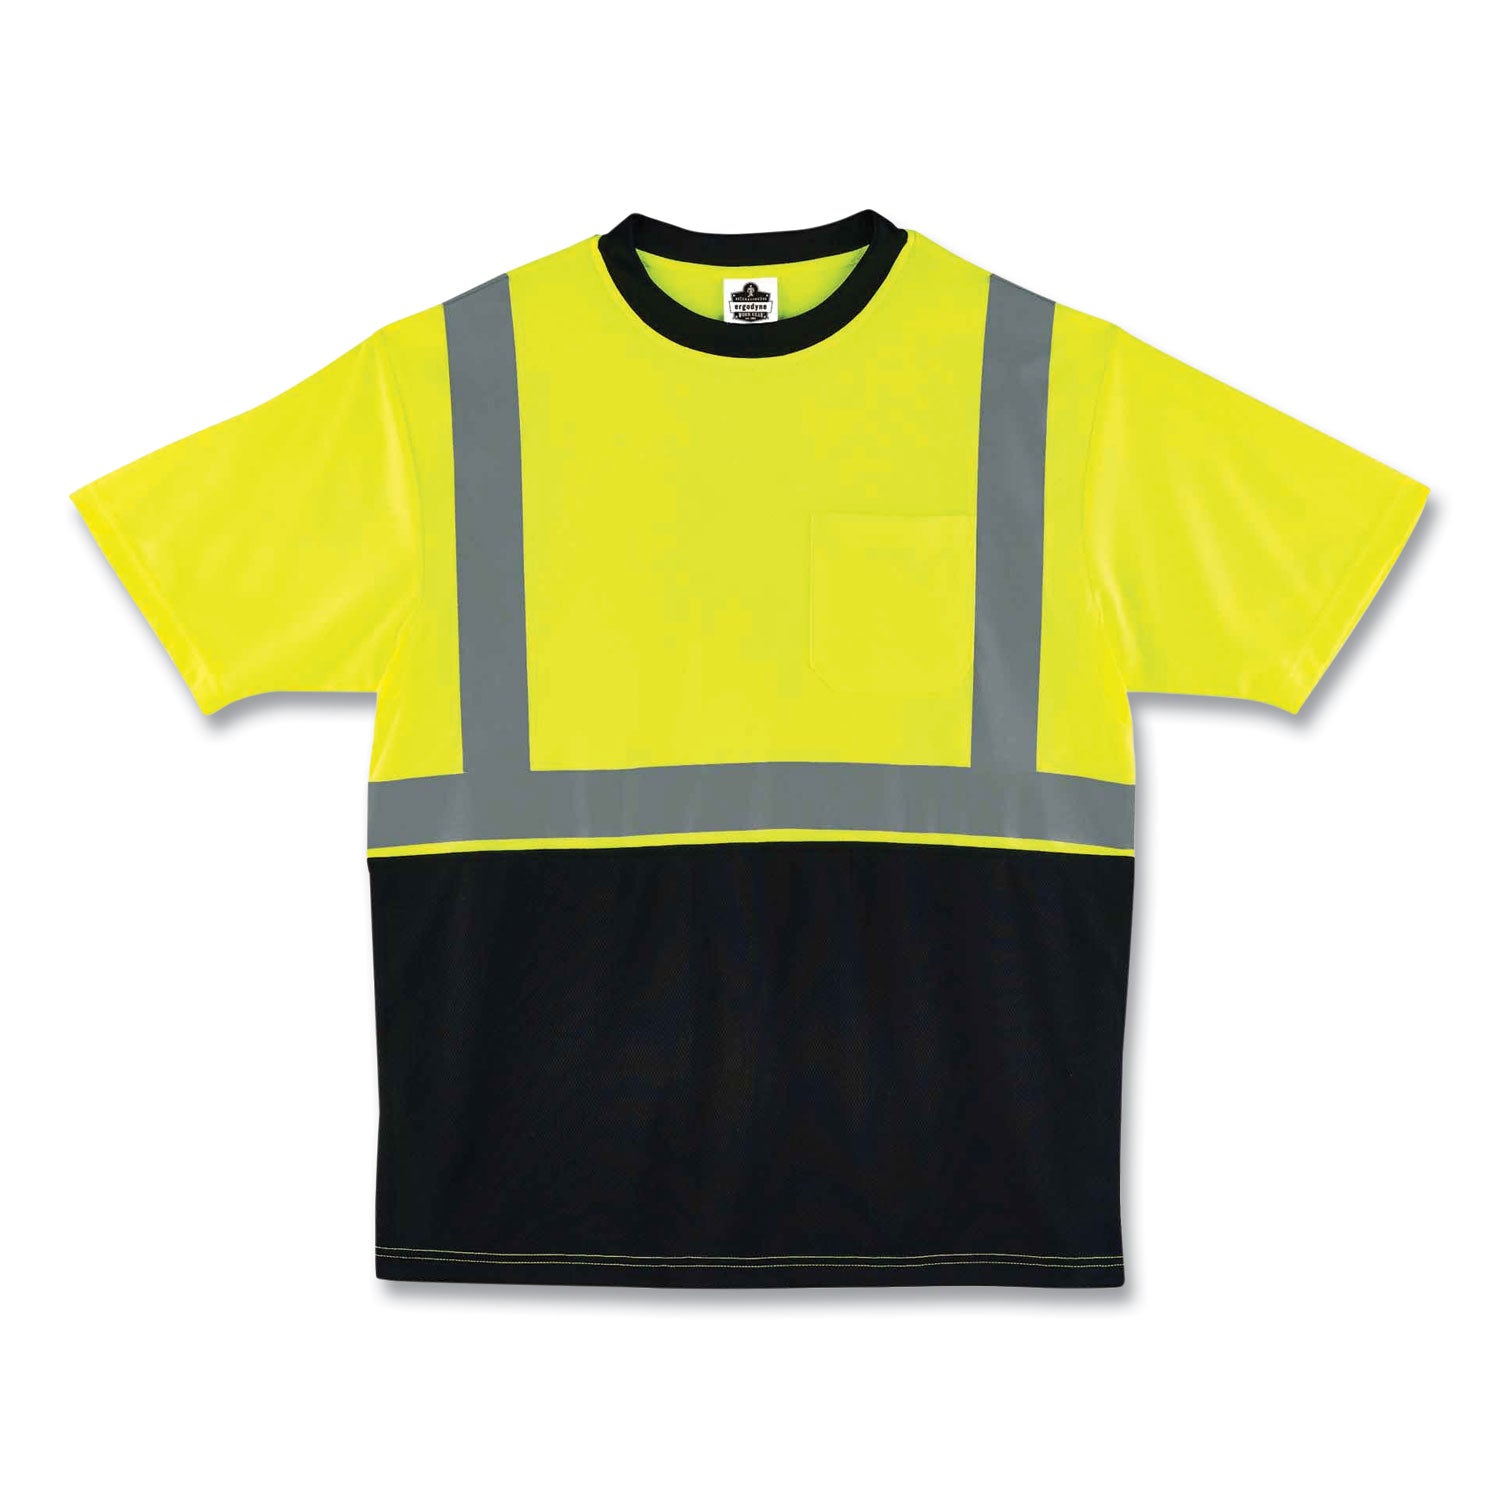 glowear-8289bk-class-2-hi-vis-t-shirt-with-black-bottom-large-lime-ships-in-1-3-business-days_ego22504 - 1